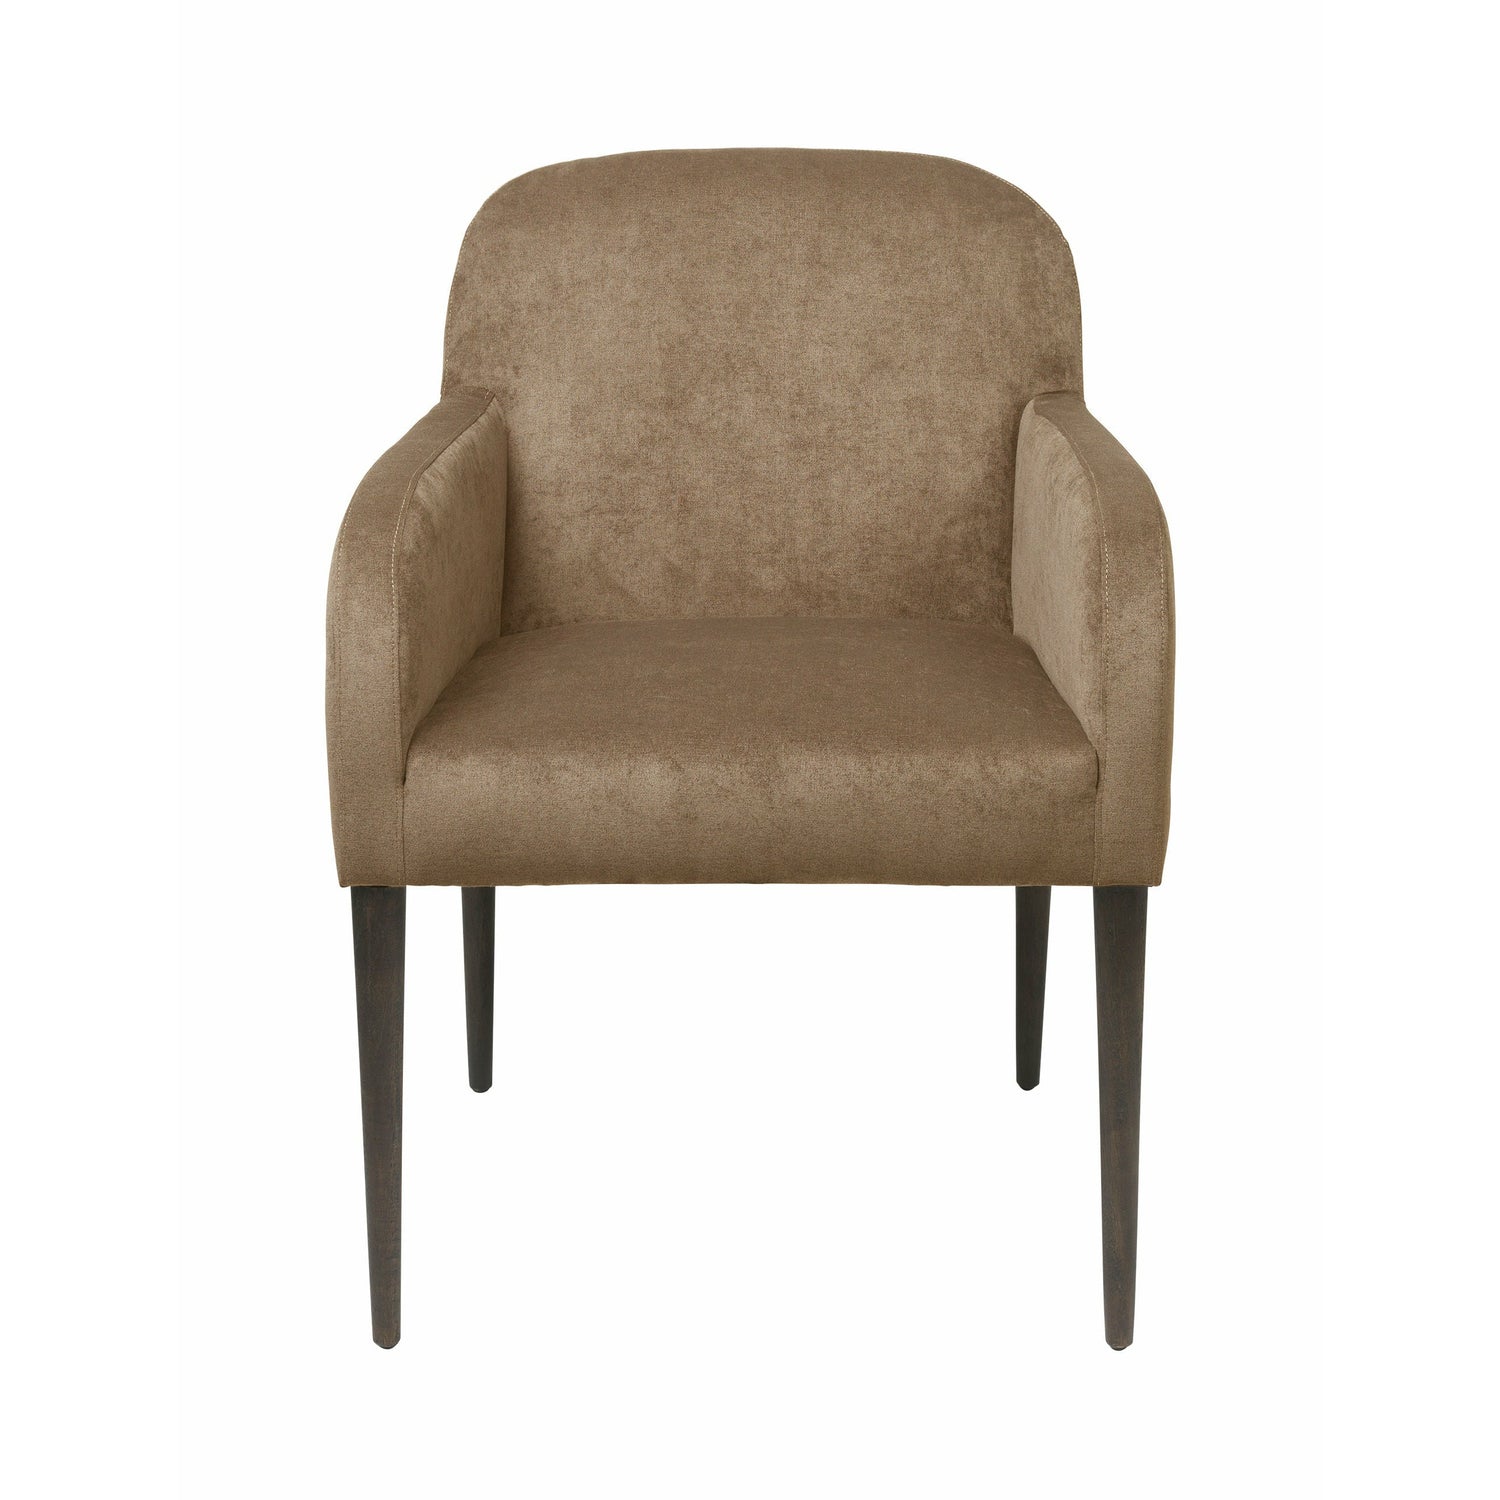 Cosy Living Gotland Dining Chair - Latte*